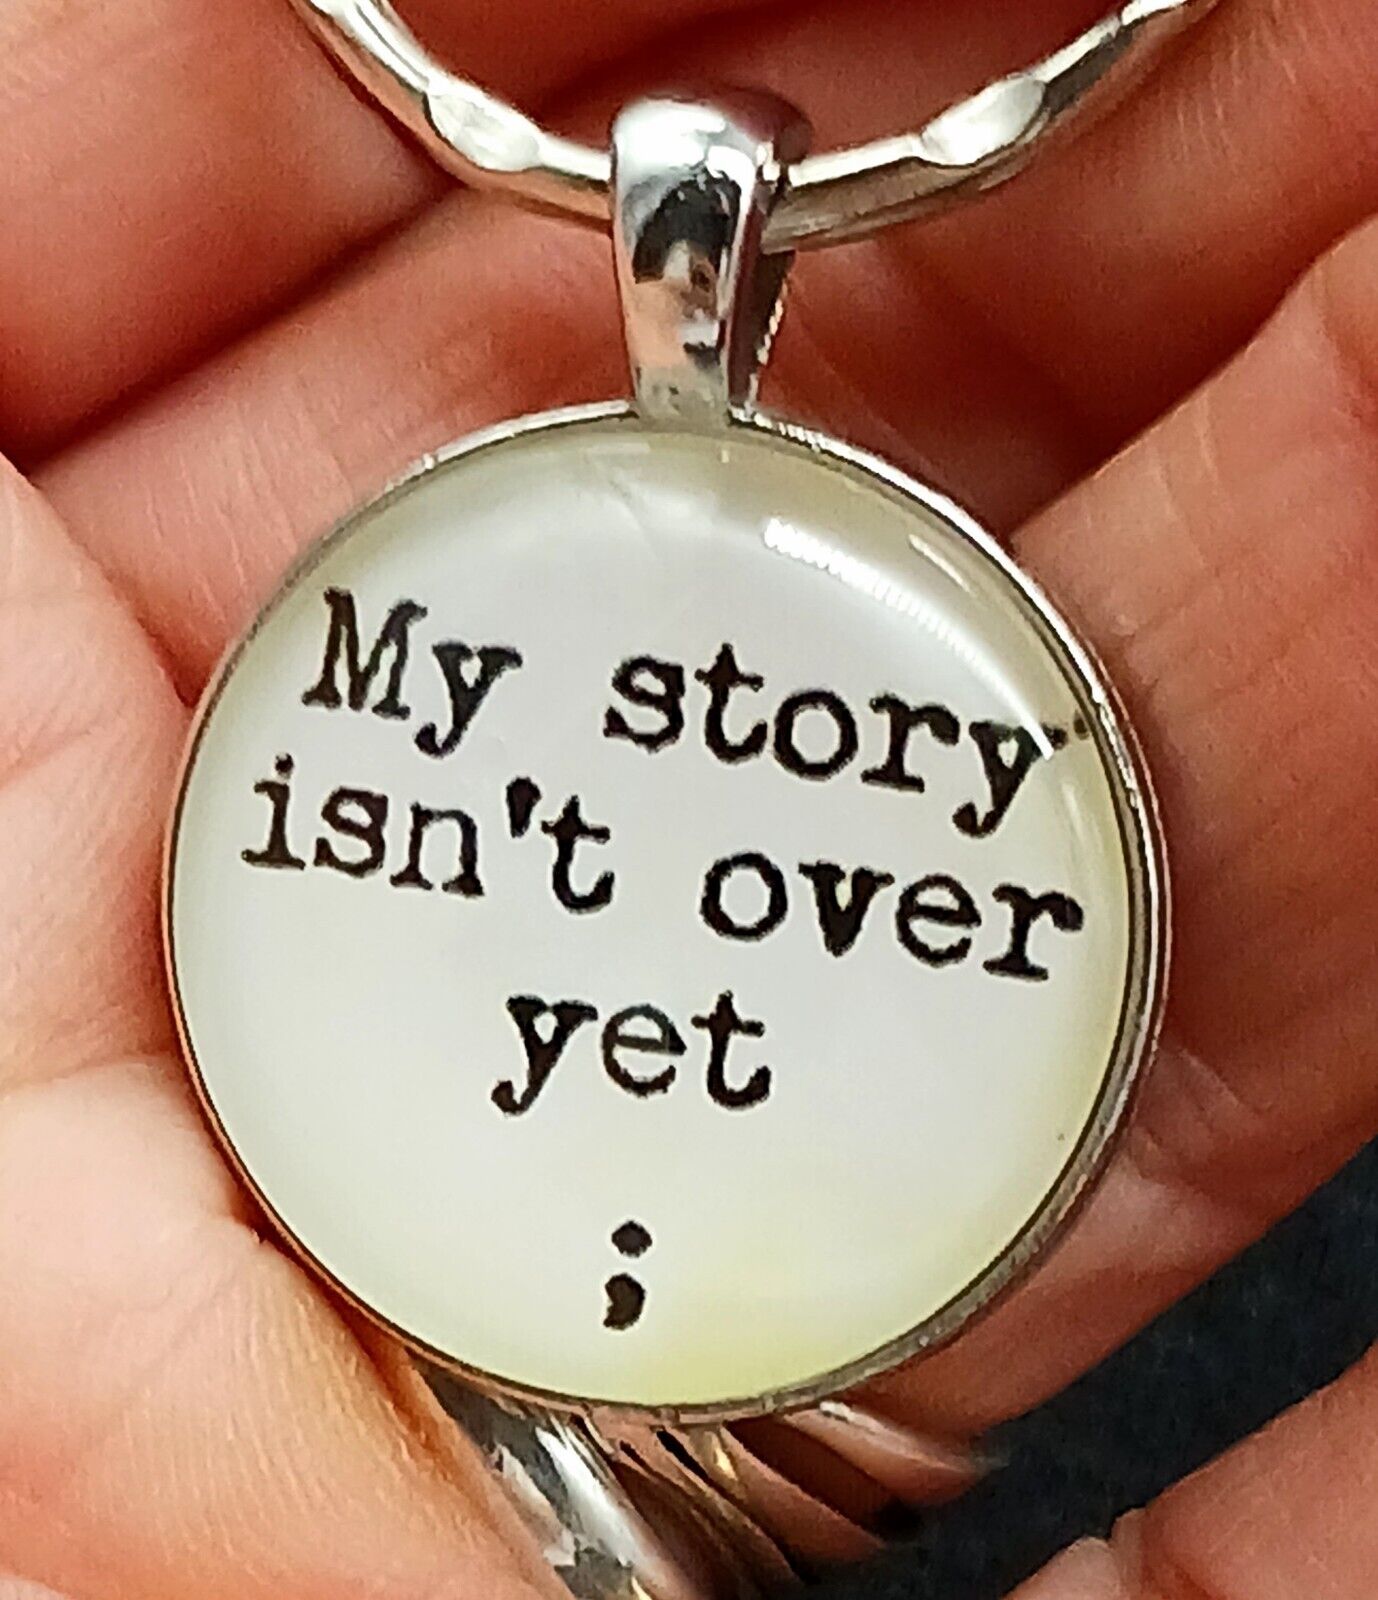 my story isn’t over yet ; Semicolon Silvery Key Ring Suicide Awareness Promise